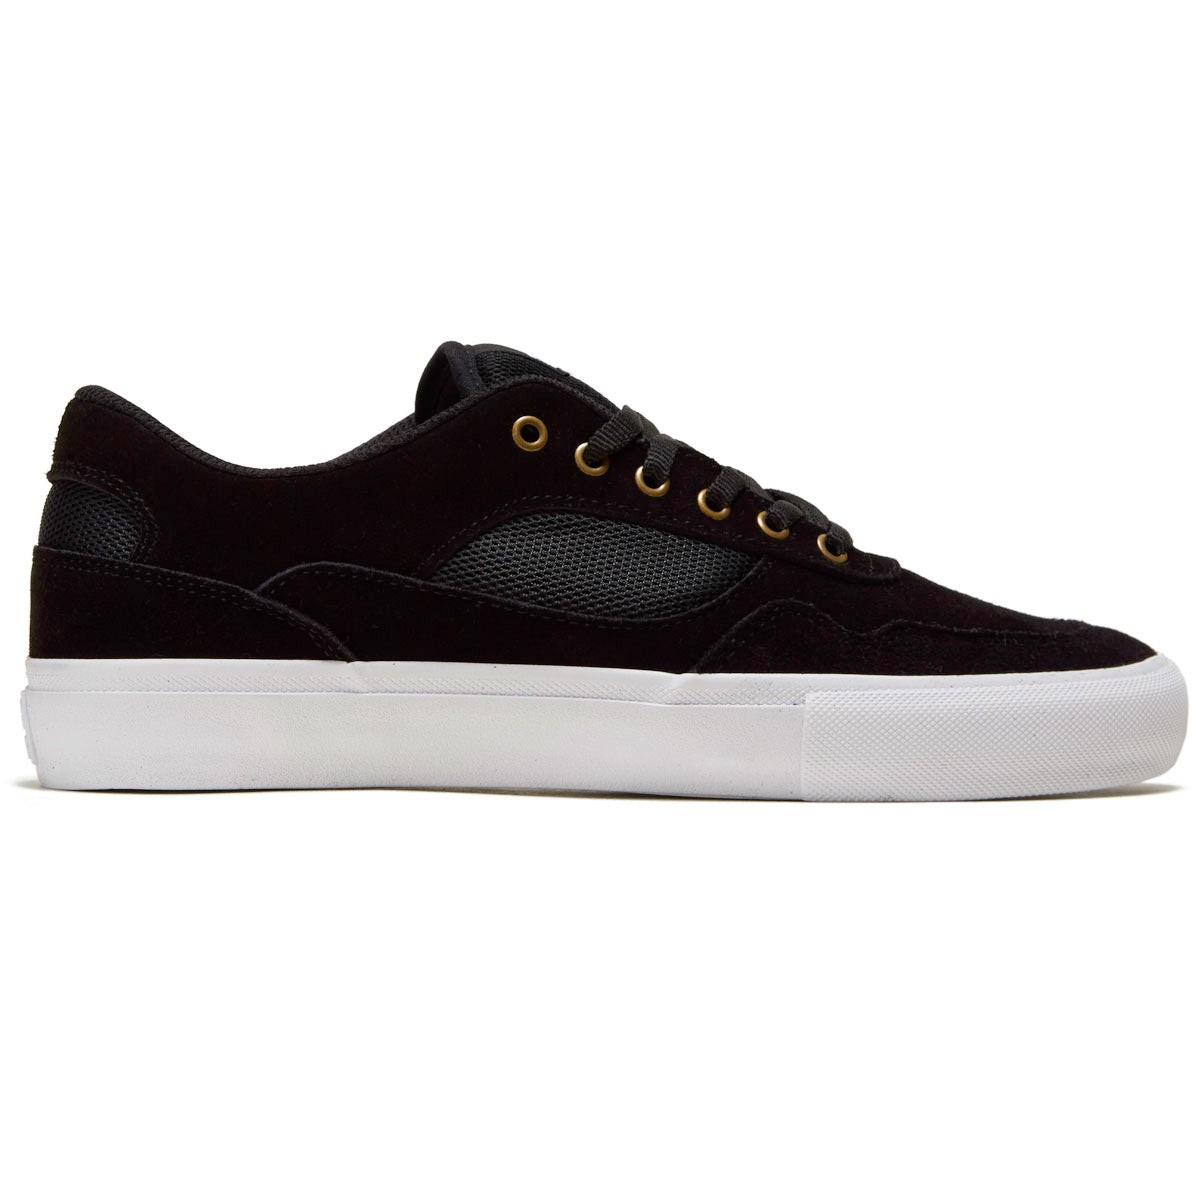 Opus Standard Low Shoes - Black/White image 1